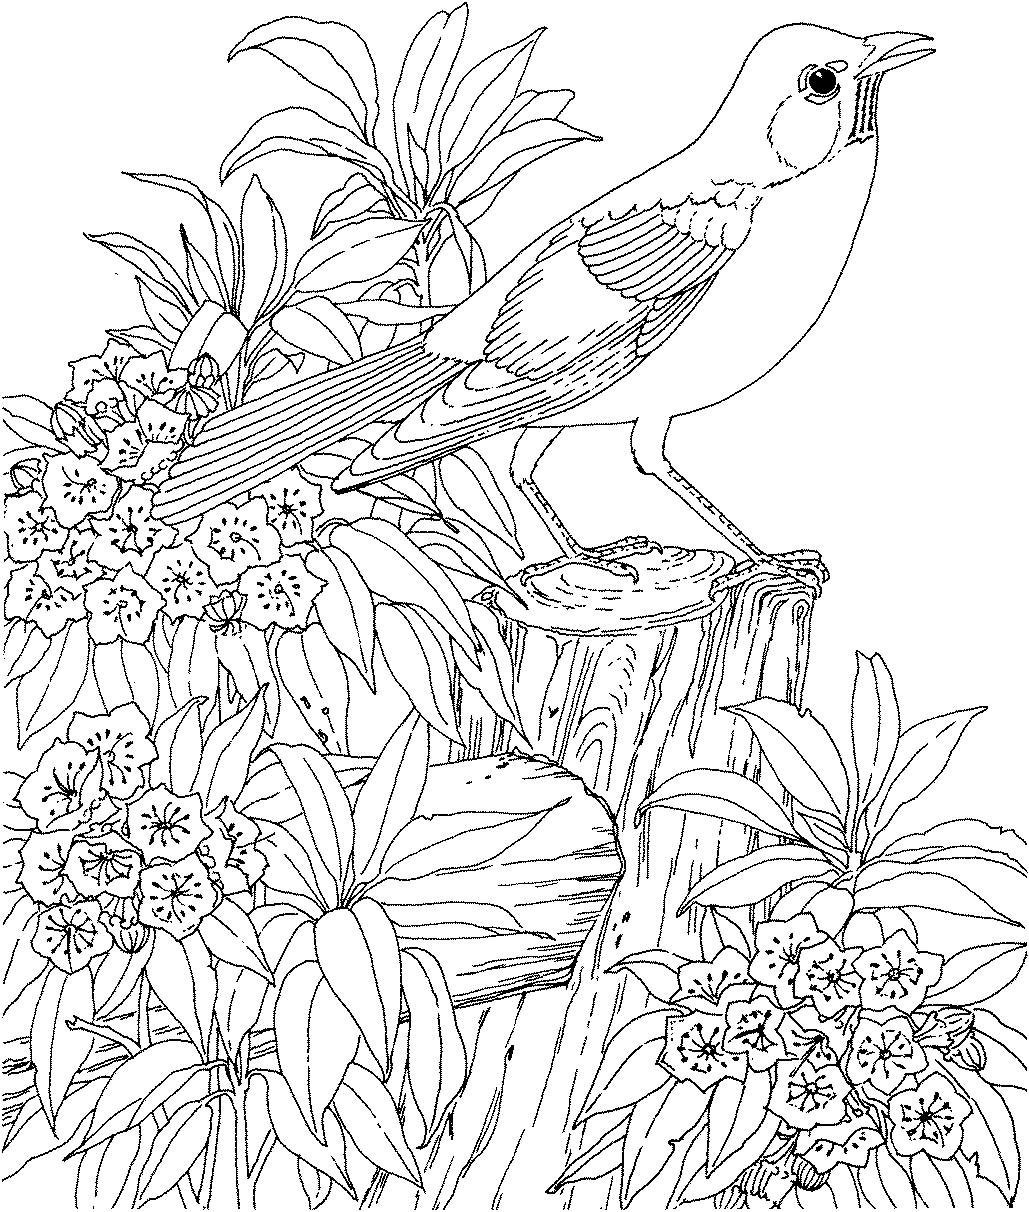 Nature Coloring Pages For Adults
 Coloring Pages for Grown Ups for Free 37 Coloring Sheets